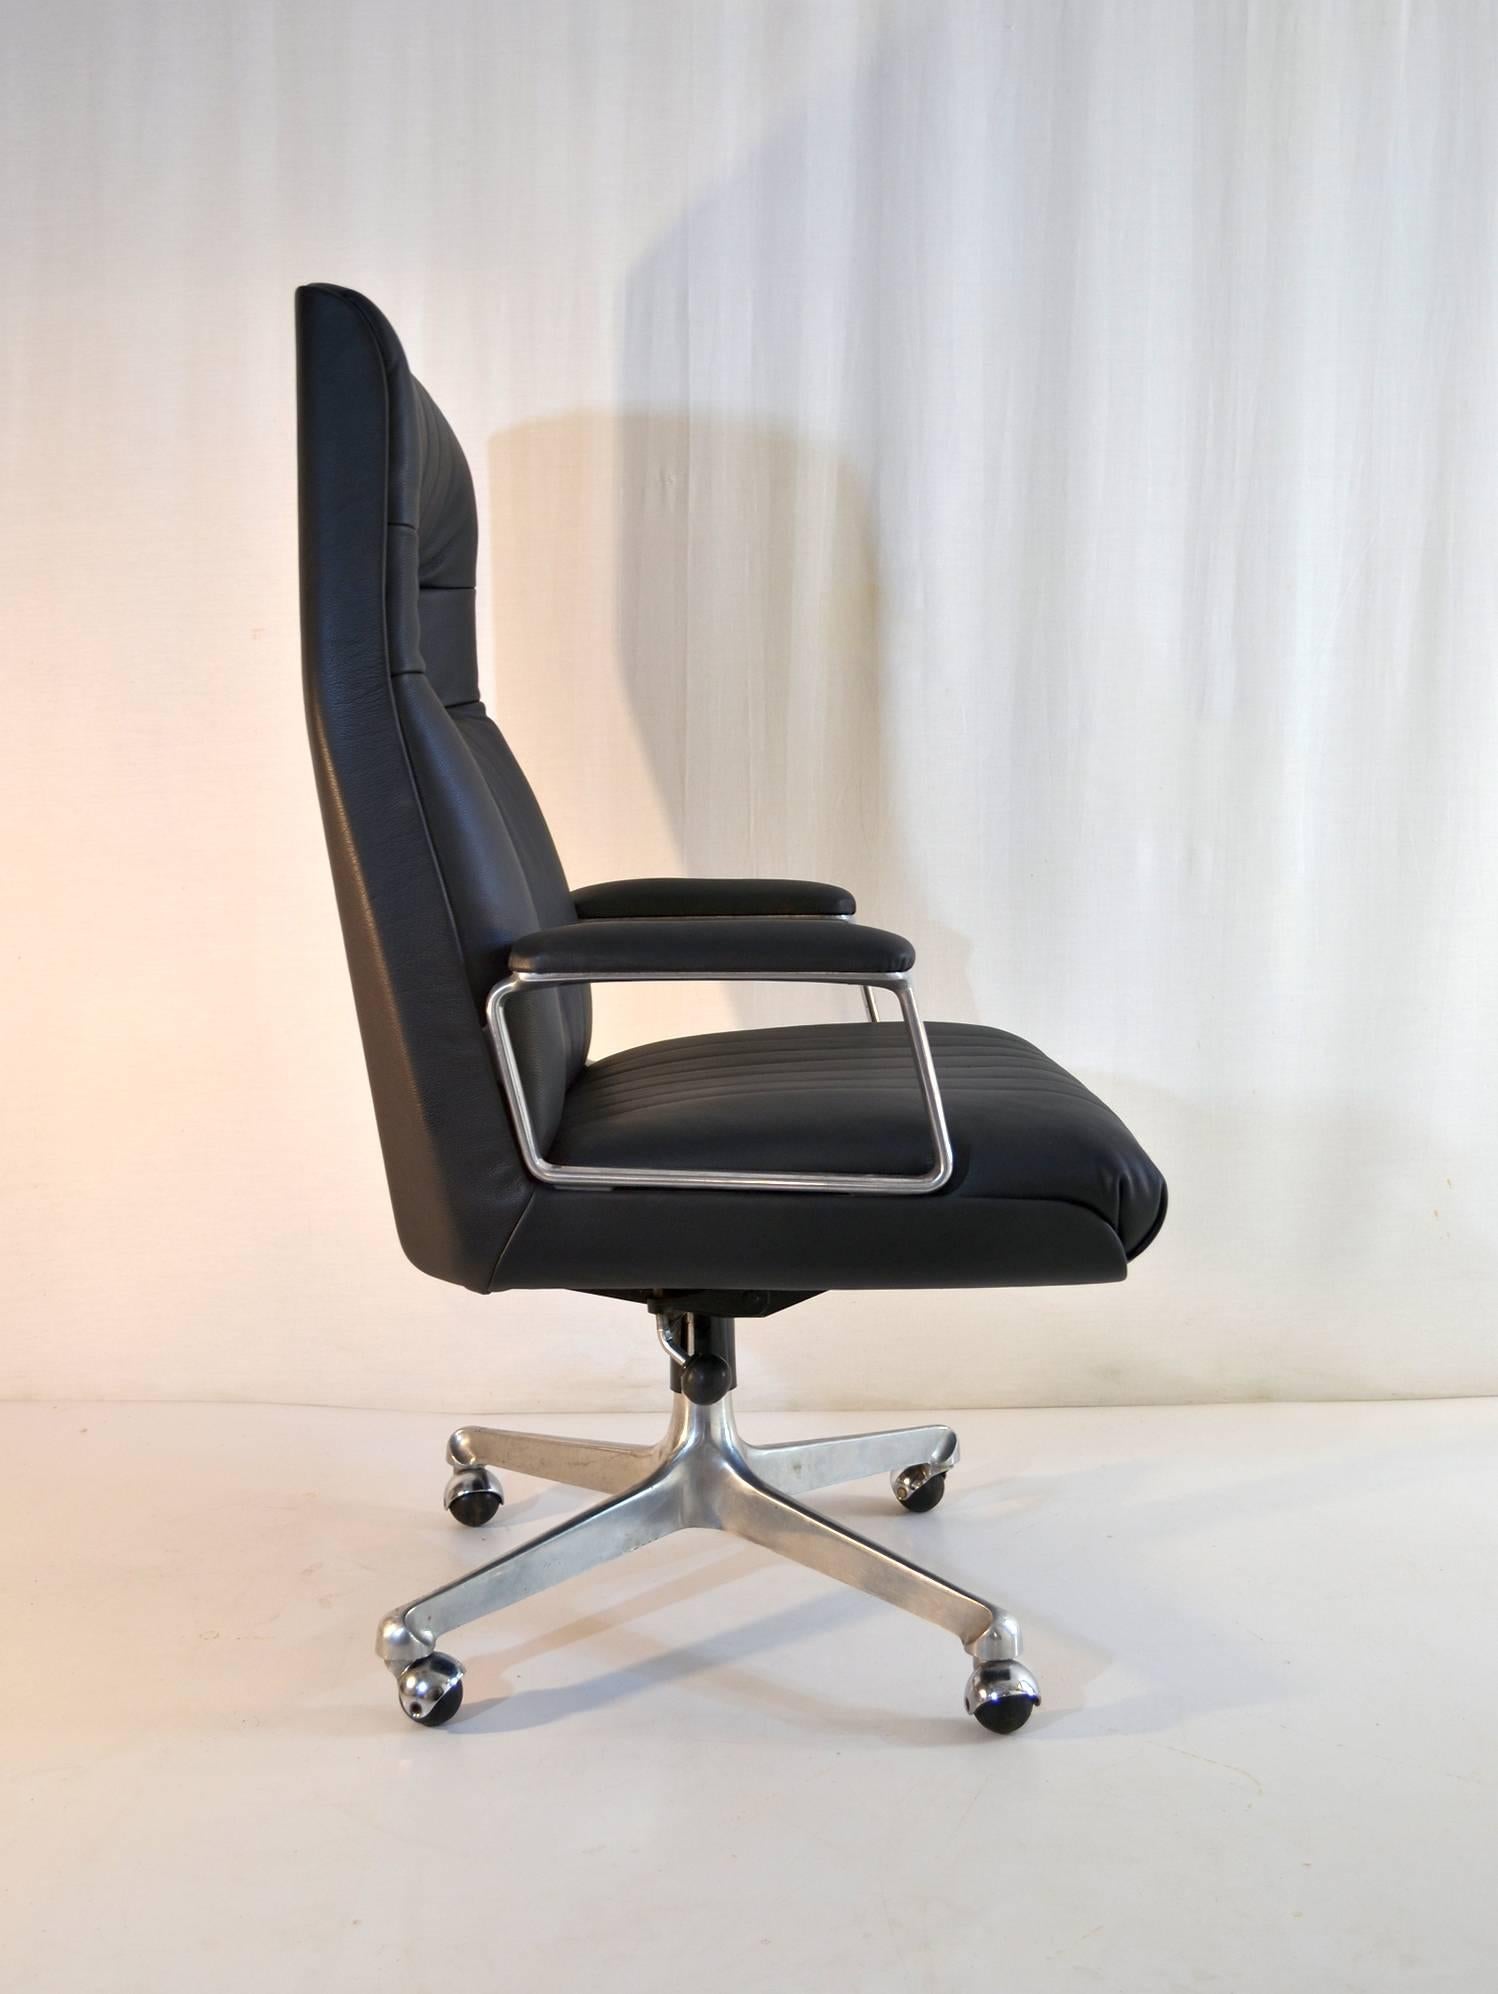 Iconic executive P128 swivel office chair on wheels by Osvaldo Borsani for Tecno. Adjustable in height that functions well. Has recently been professionally reupholstered with a high quality black leather.
The difference in height is about 105-120